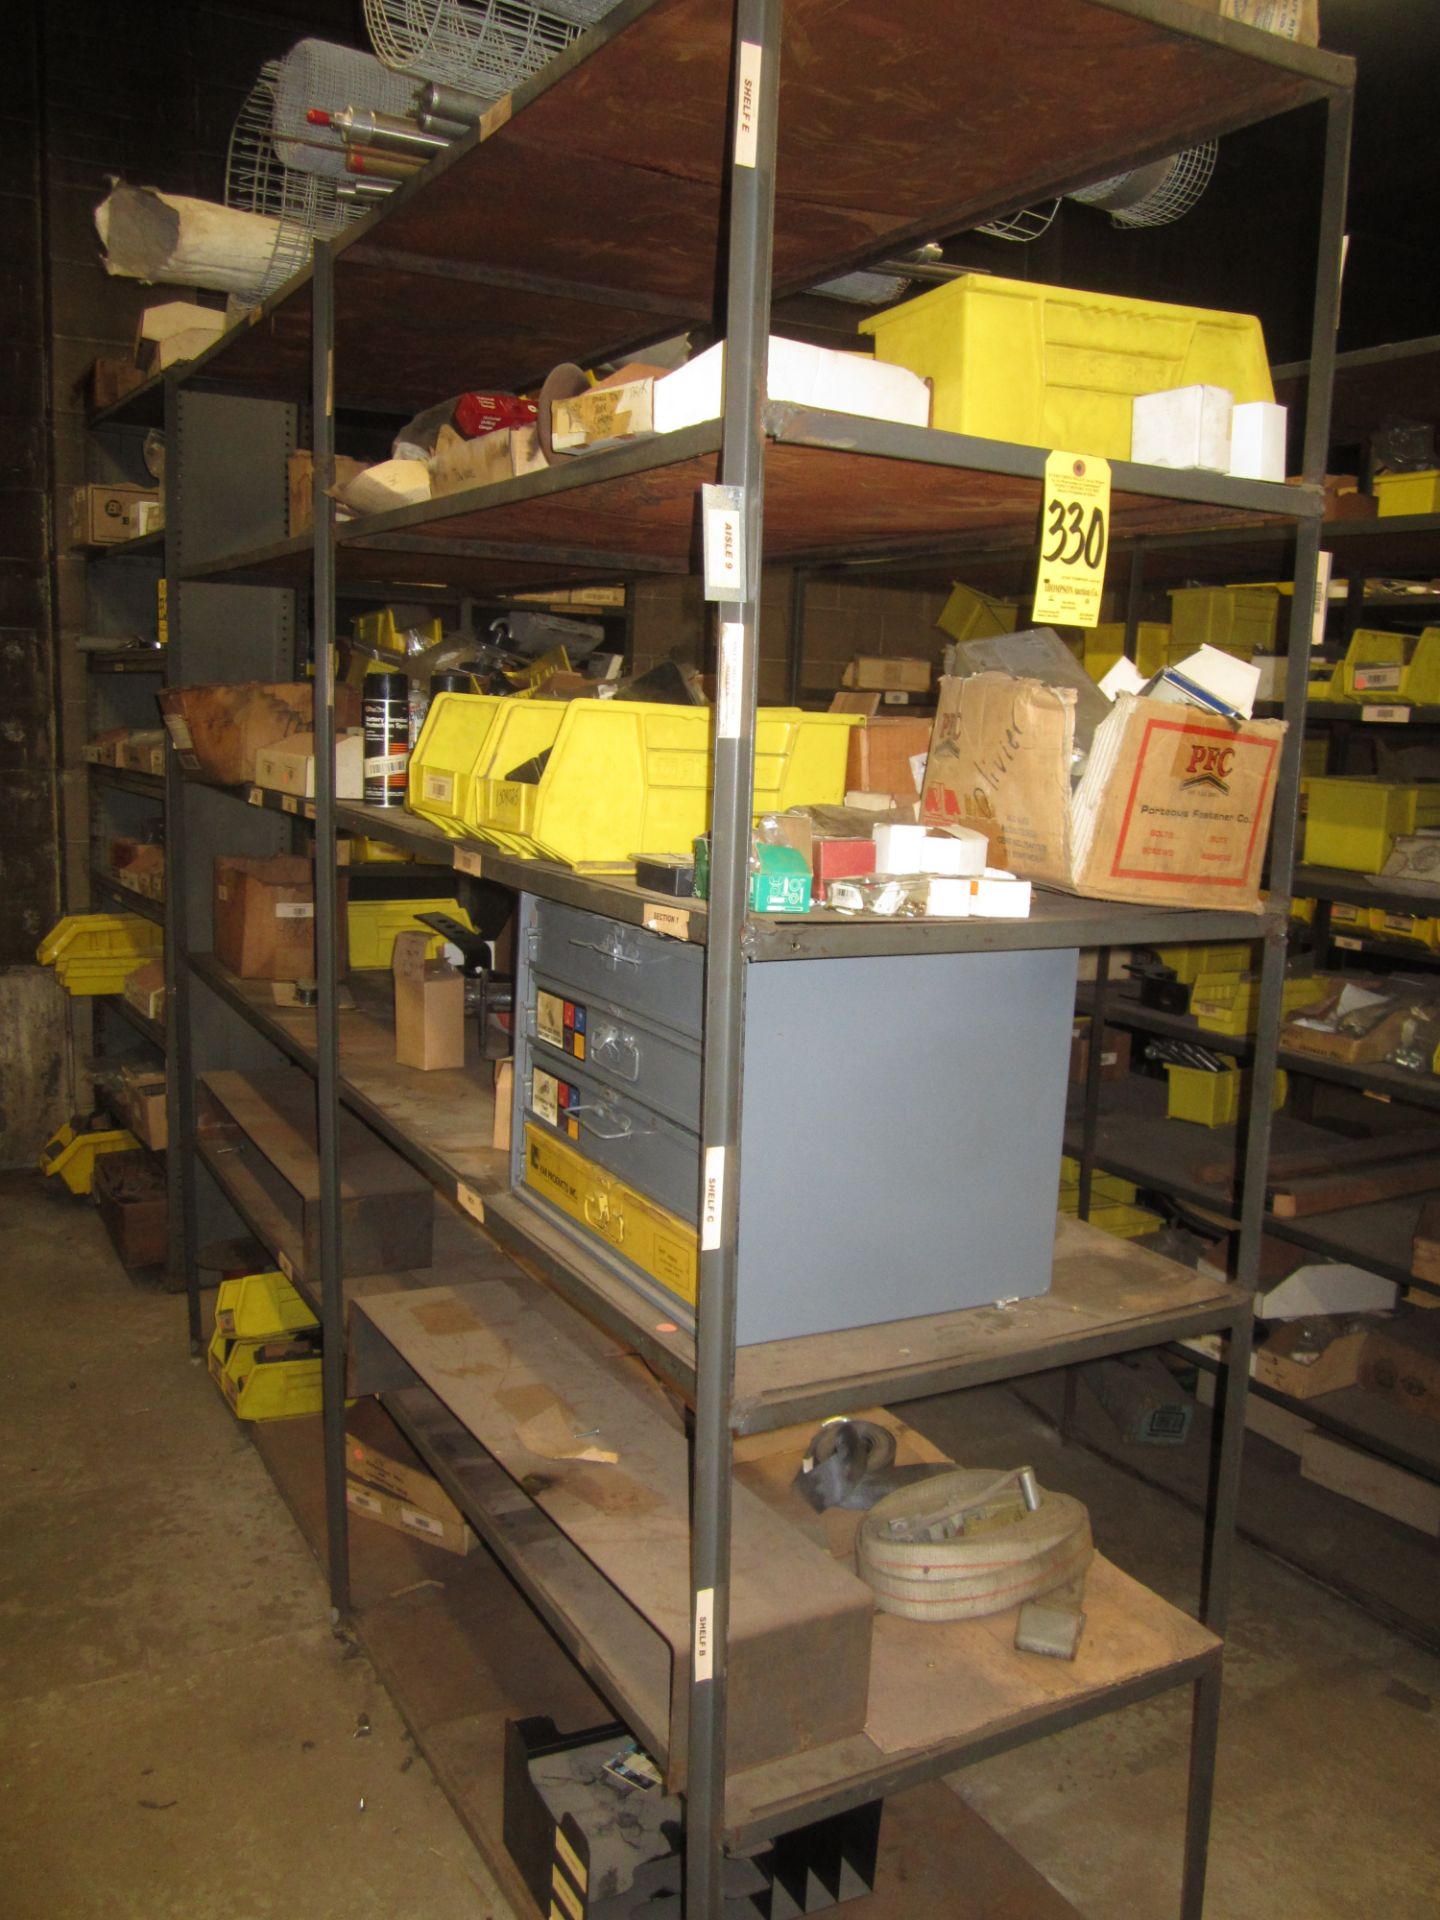 Welded Metal Shelving Unit and Contents